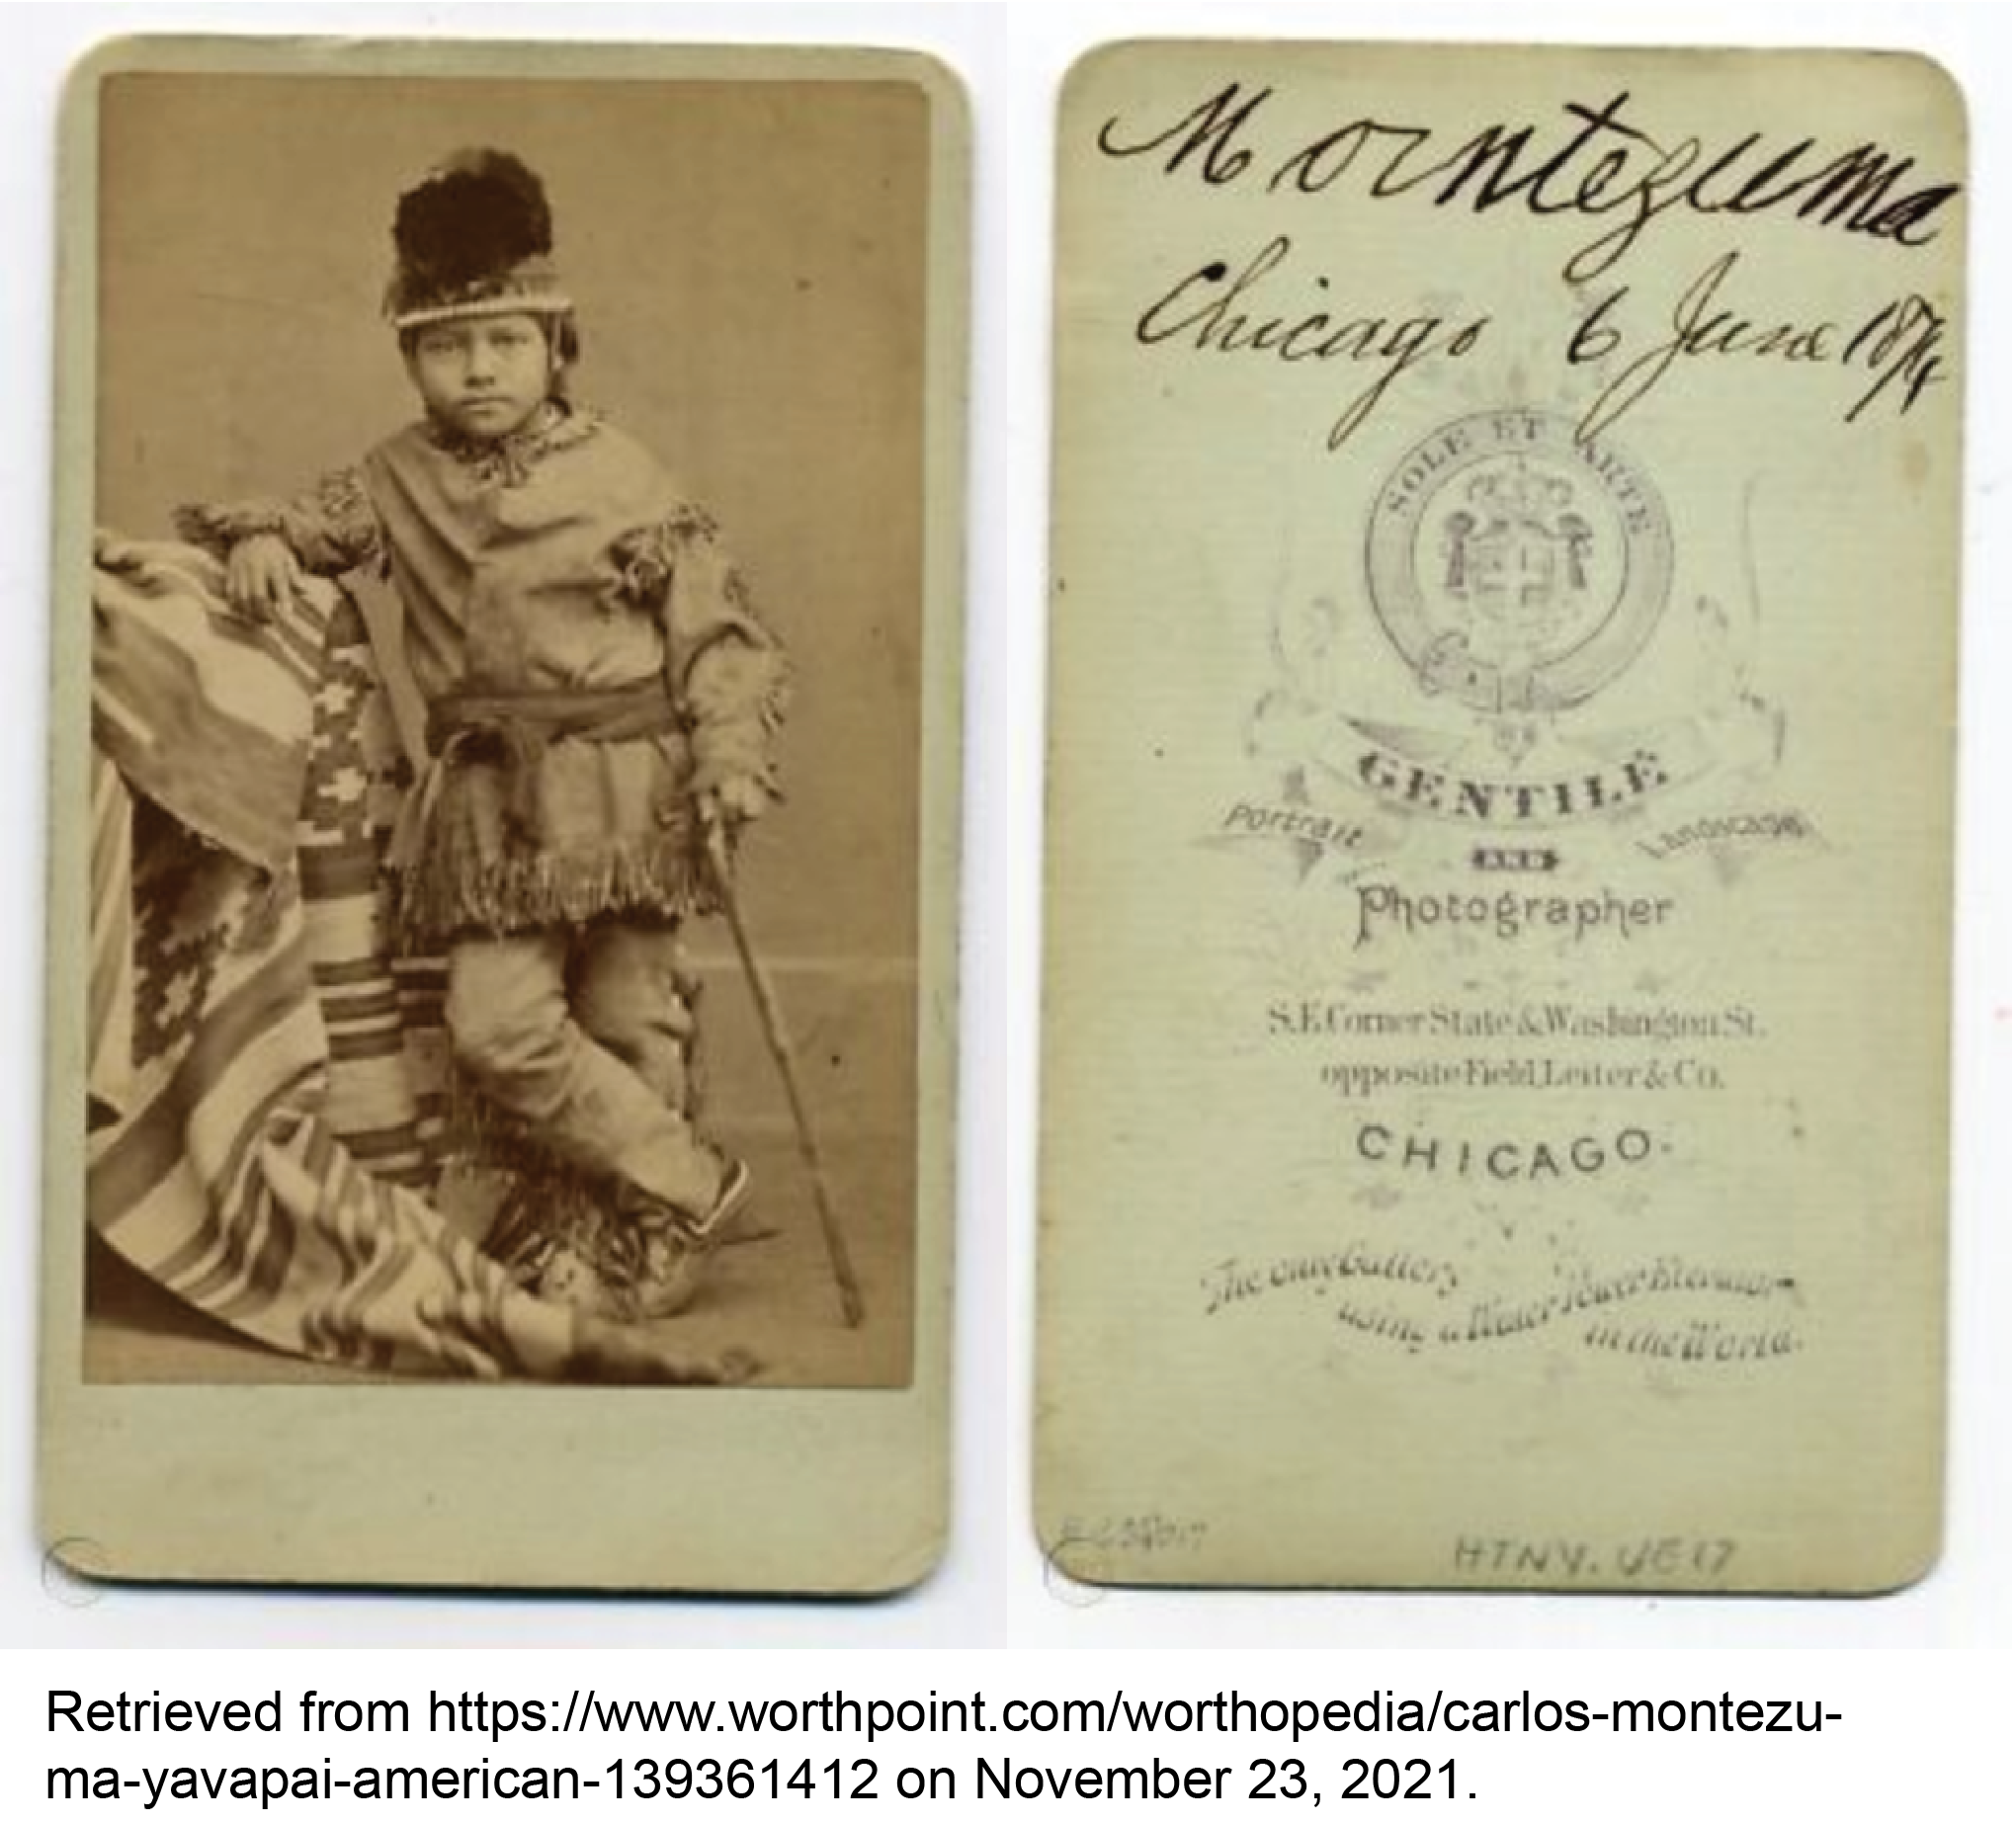 Young boy in fringed Native American clothing, moccassins, and hat, leaning on a support covered in a Native blanket. Handwriting on reverse side reads: "Montezuma Chicago 6 June 1874" above Carlo Gentile's cartouche.